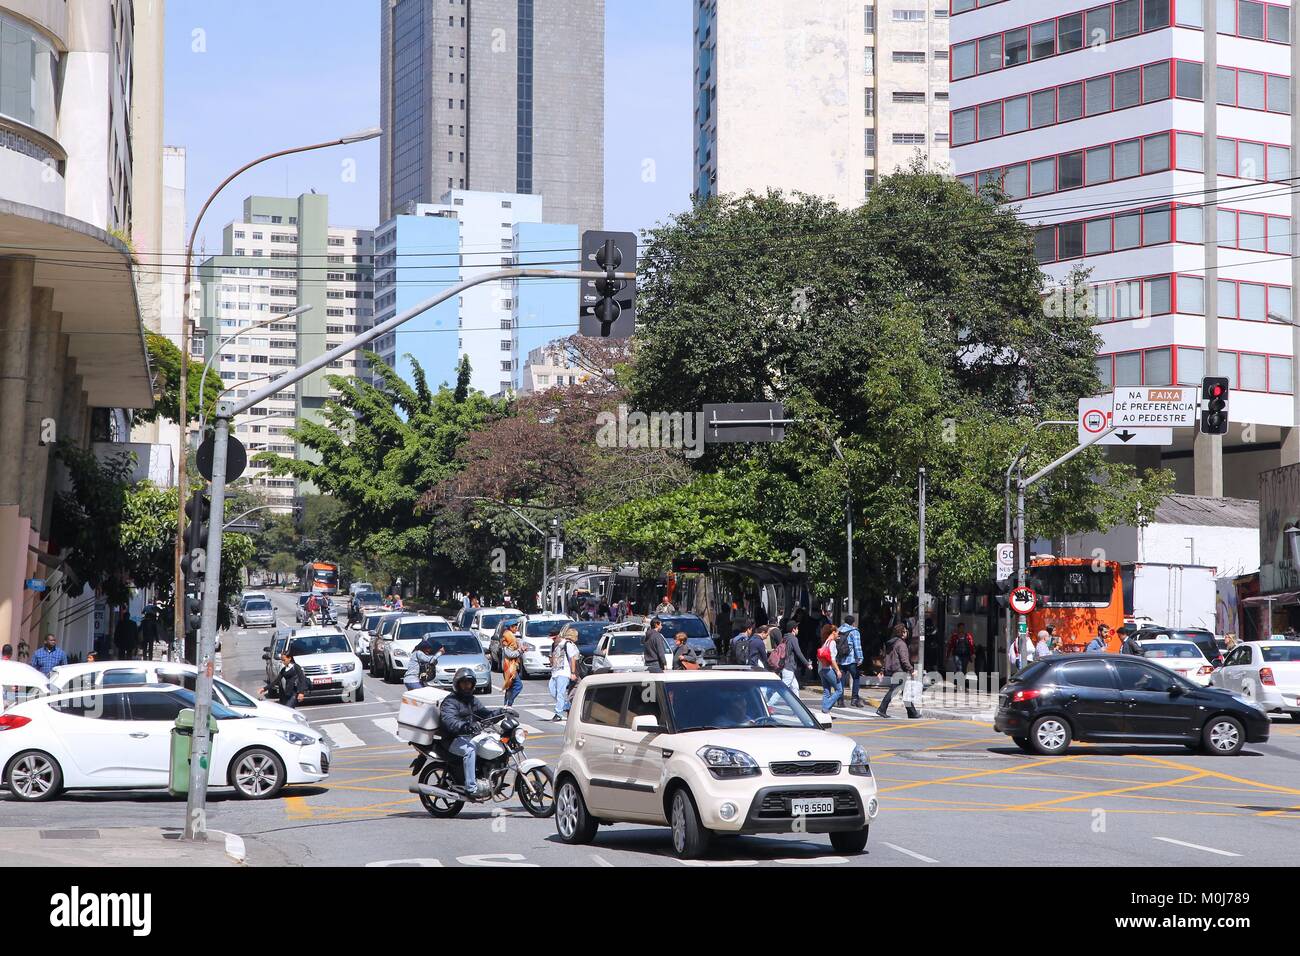 SAO PAULO, BRAZIL - OCTOBER 6, 2014: People drive in Sao Paulo. With 21.2 million people Sao Paulo metropolitan area is the 8th most populous in the w Stock Photo